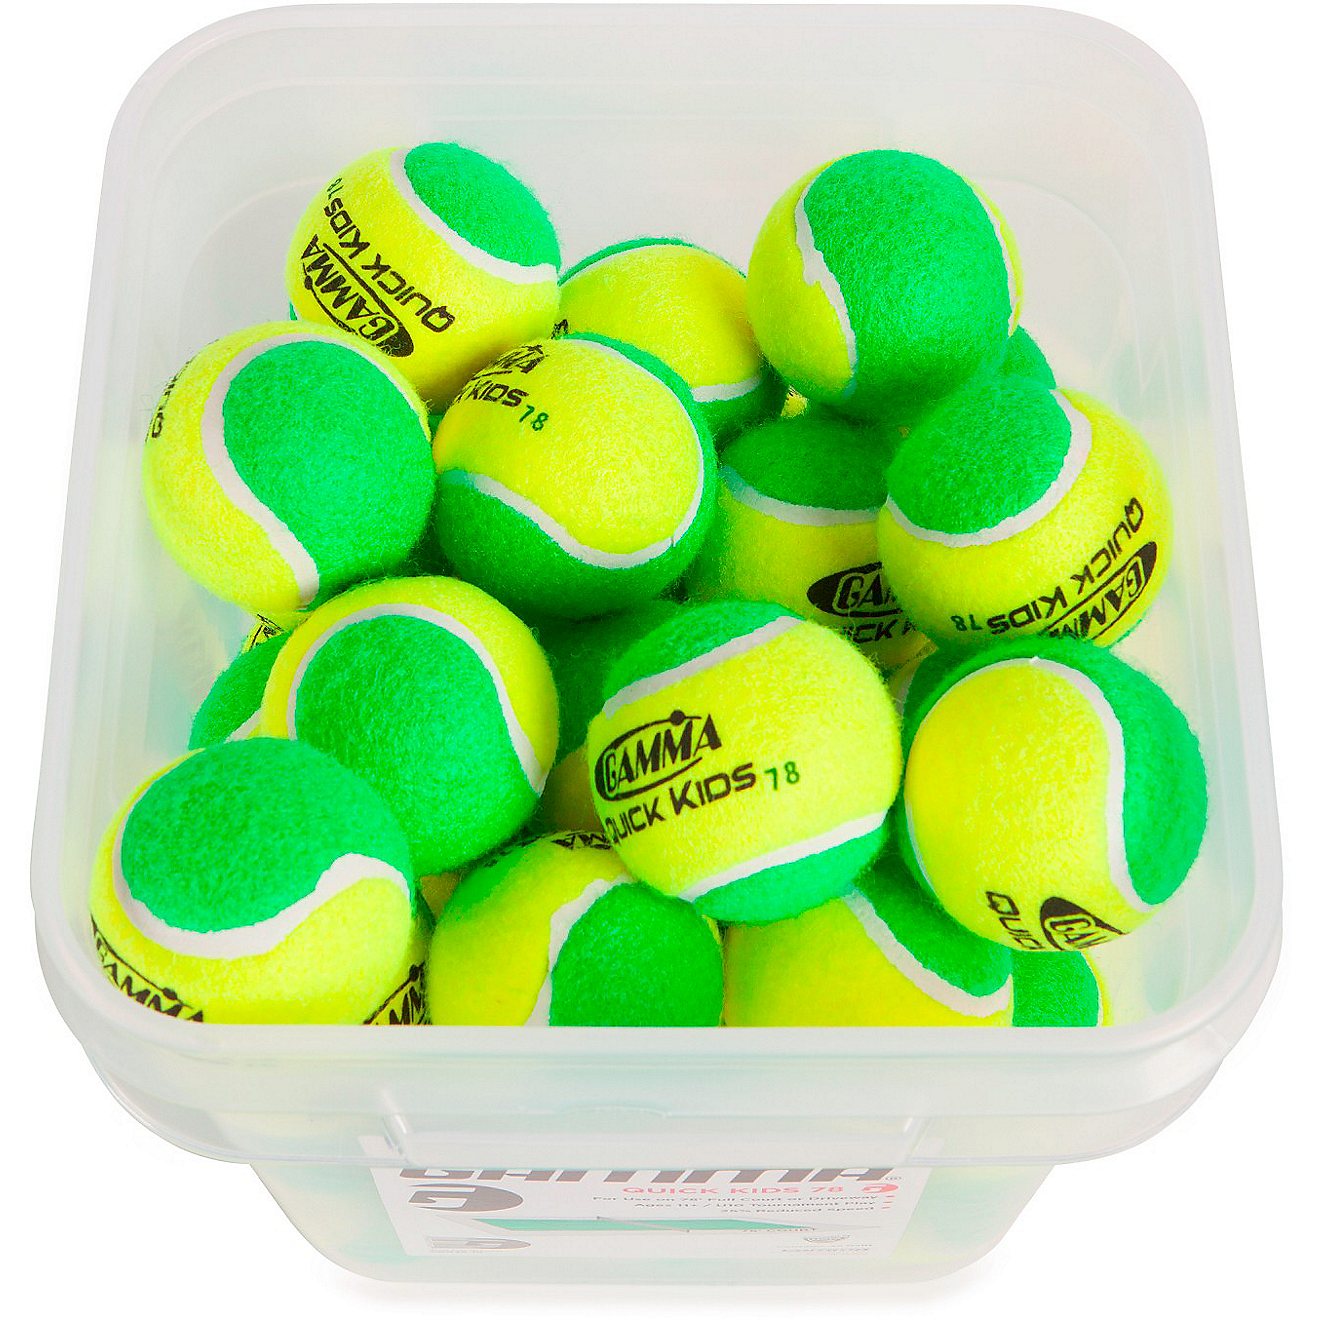 Gamma Quick Kids 78 Youth Tennis Balls Bucket 48-Count                                                                           - view number 2